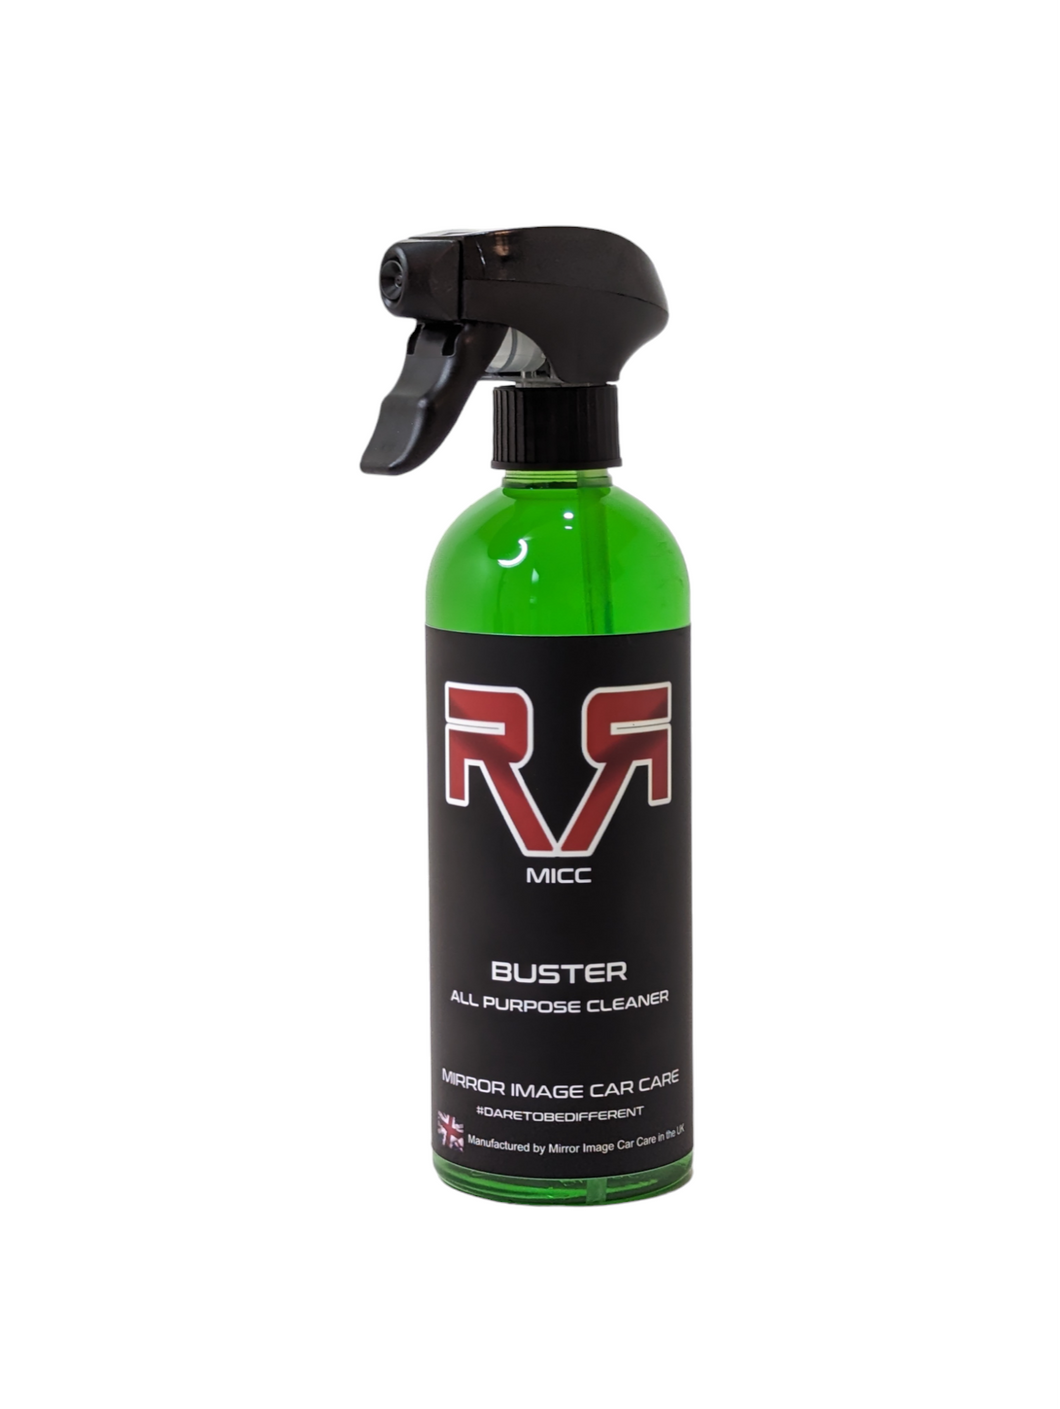 Buster - All Purpose Cleaner